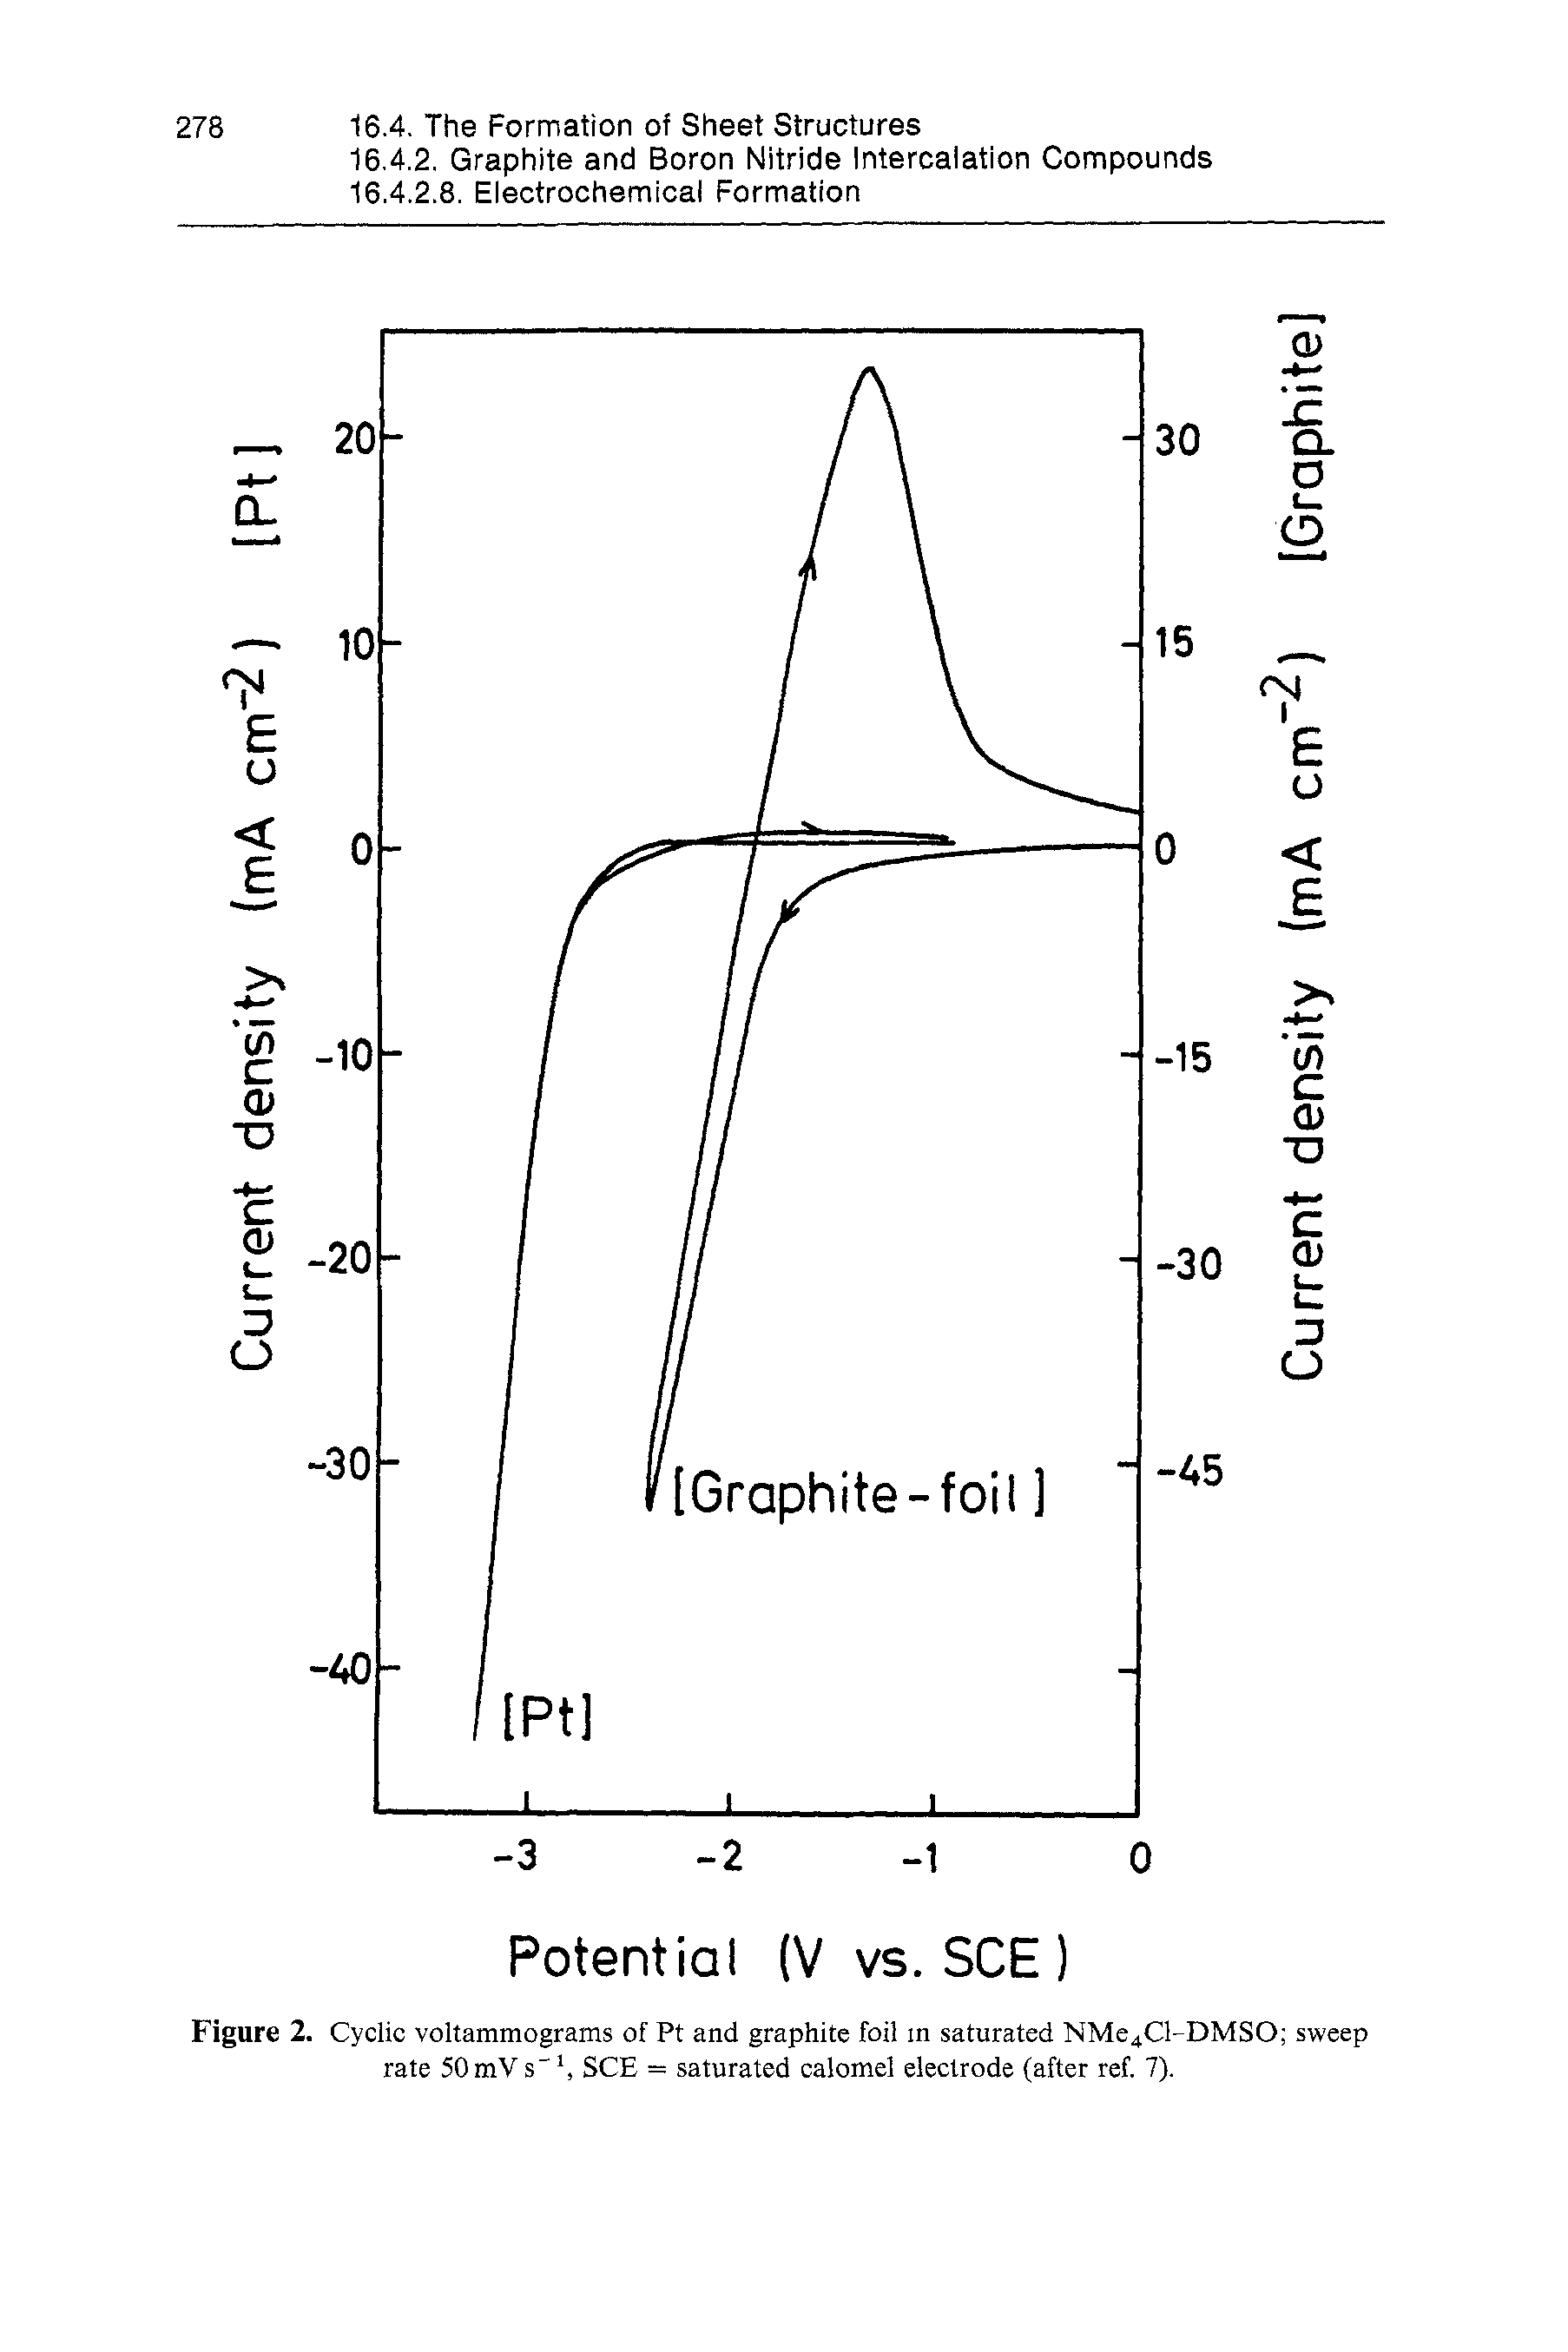 Figure 2. Cyclic voltammograms of Pt and graphite foil m saturated NMe4Cl-DMSO sweep rate 50 mV s", SCE = saturated calomel electrode (after ref. 7).